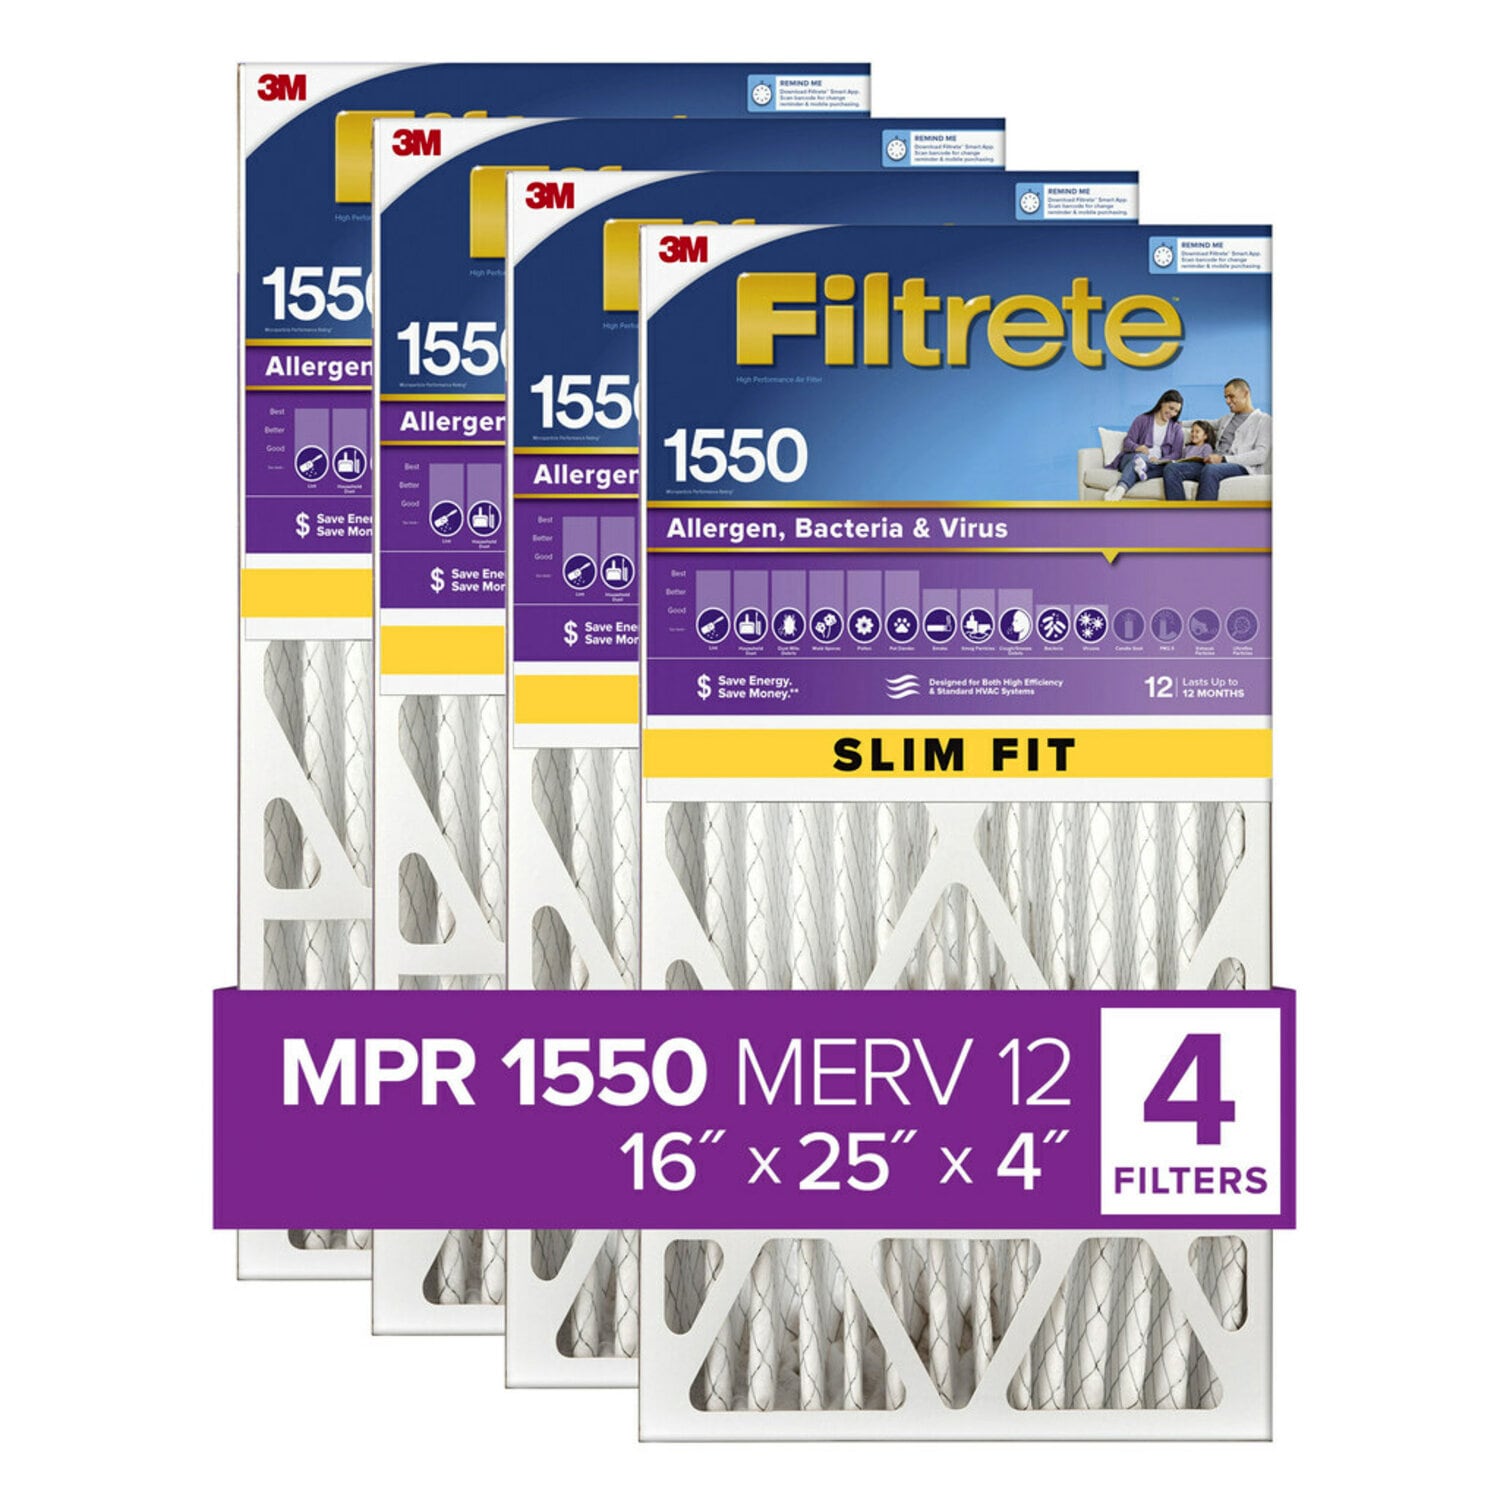 7100096893 - Filtrete Ultra Allergen Reduction Deep Pleat Filter NDP01-4S-4, 16 in x 25 in x 4 in , 1/Pack, 4/case